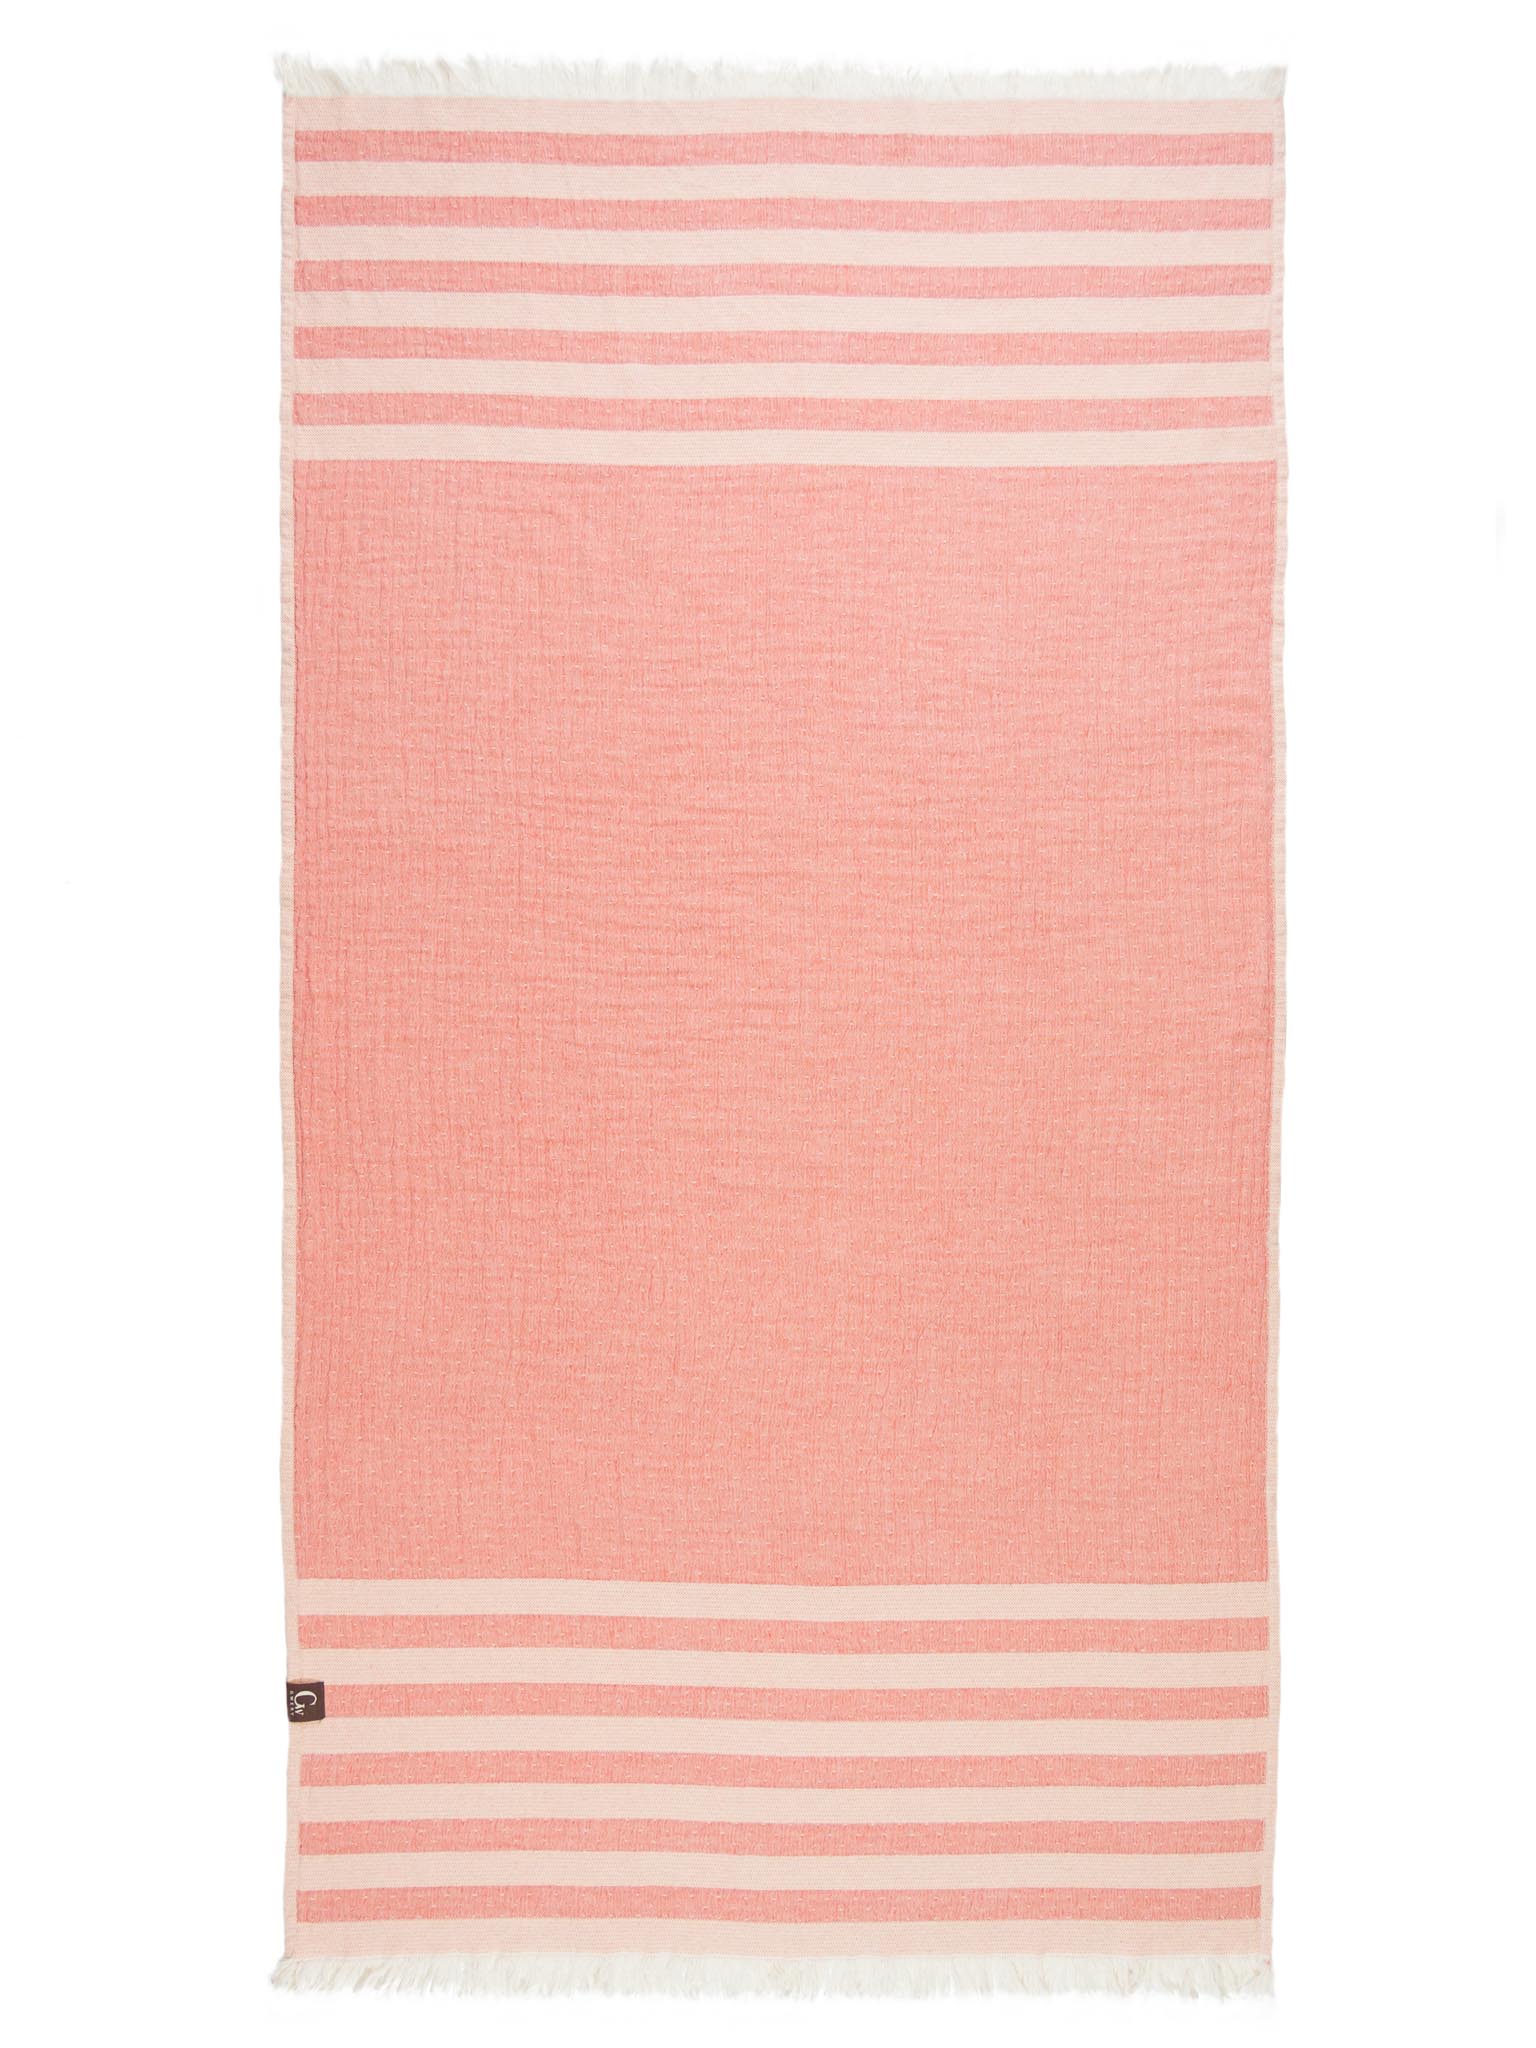 Yellow and orange striped beach towel open up